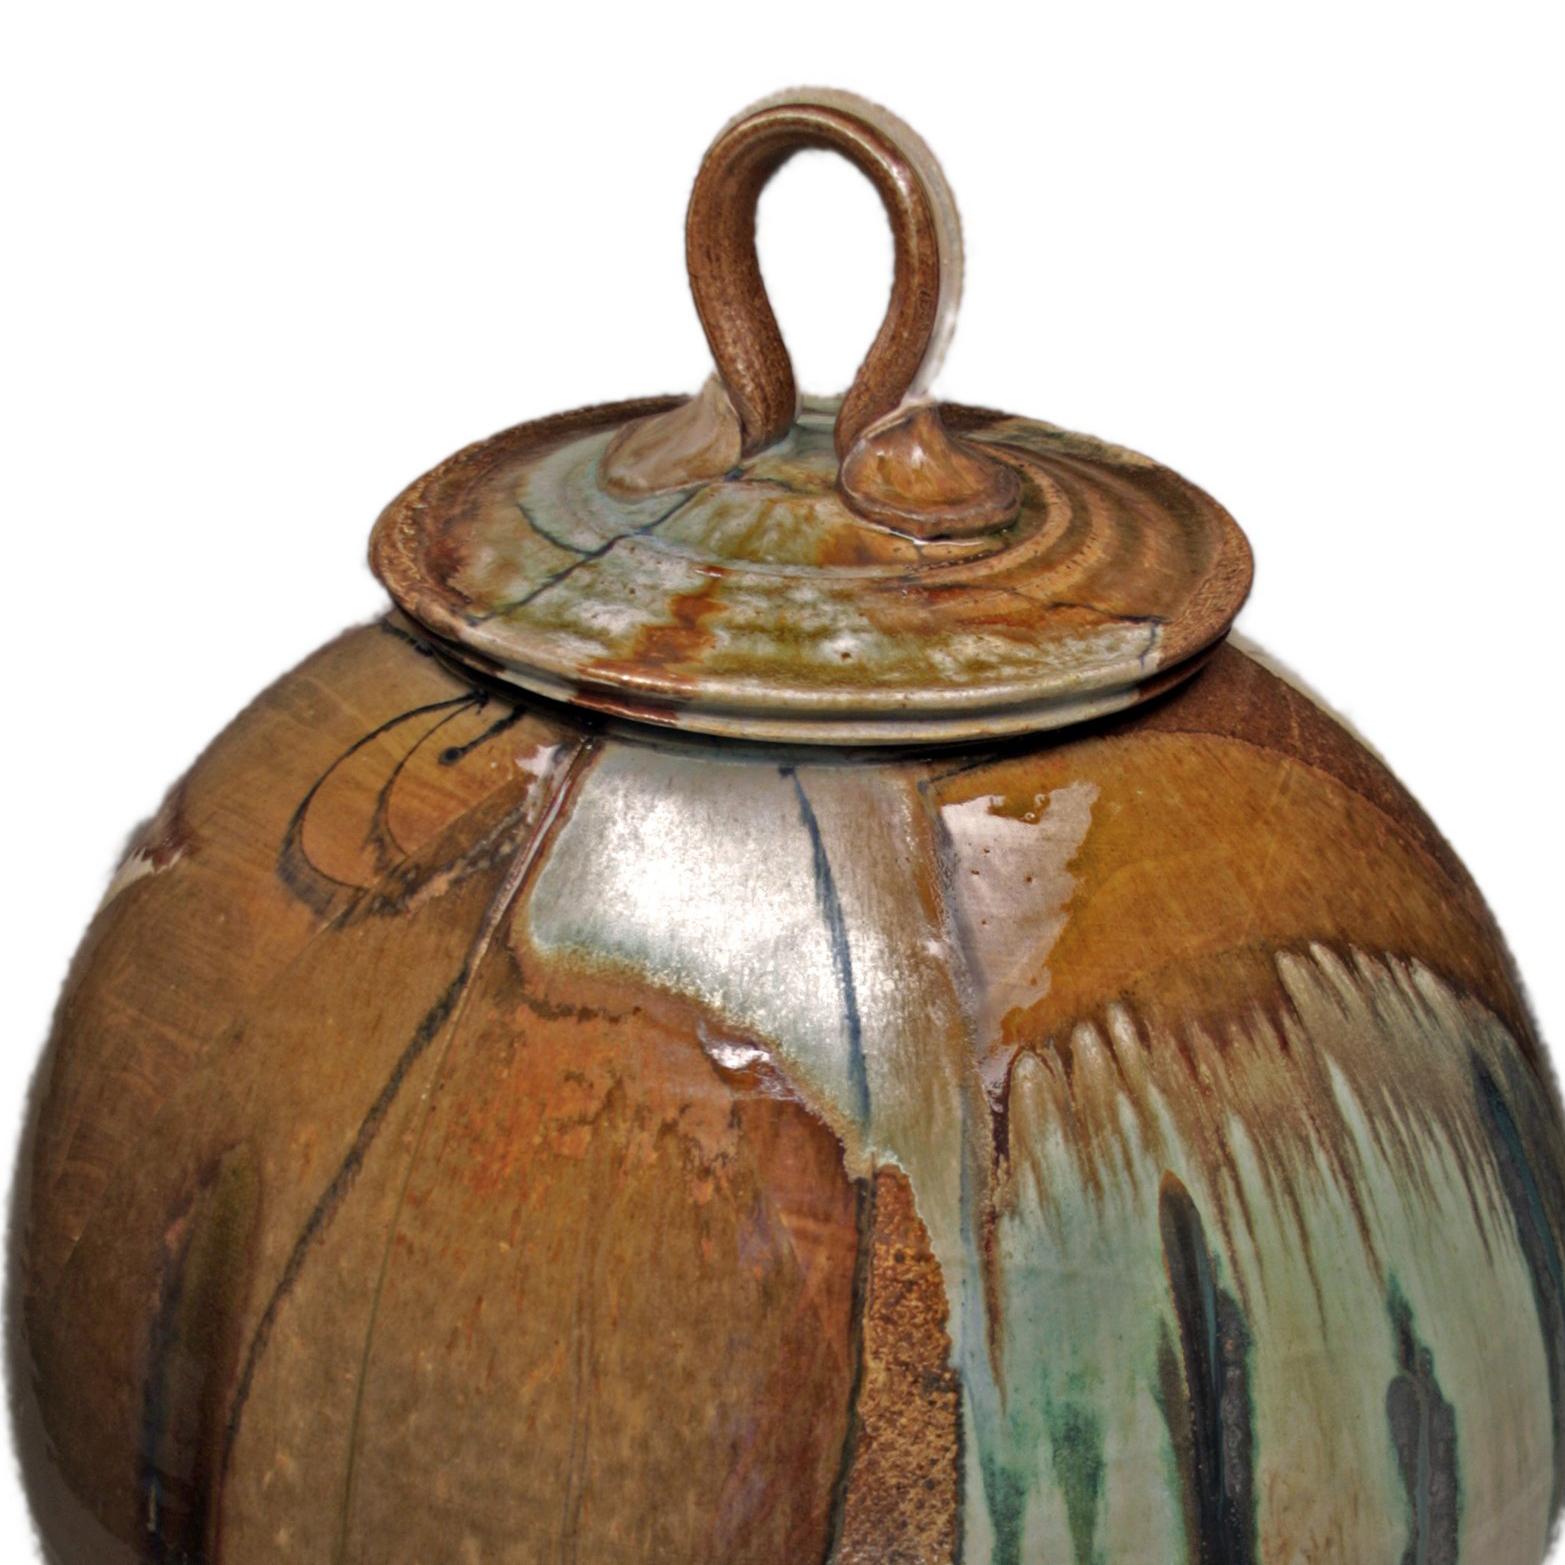 Large Covered Jar 2 - Contemporary Art by Josh DeWeese